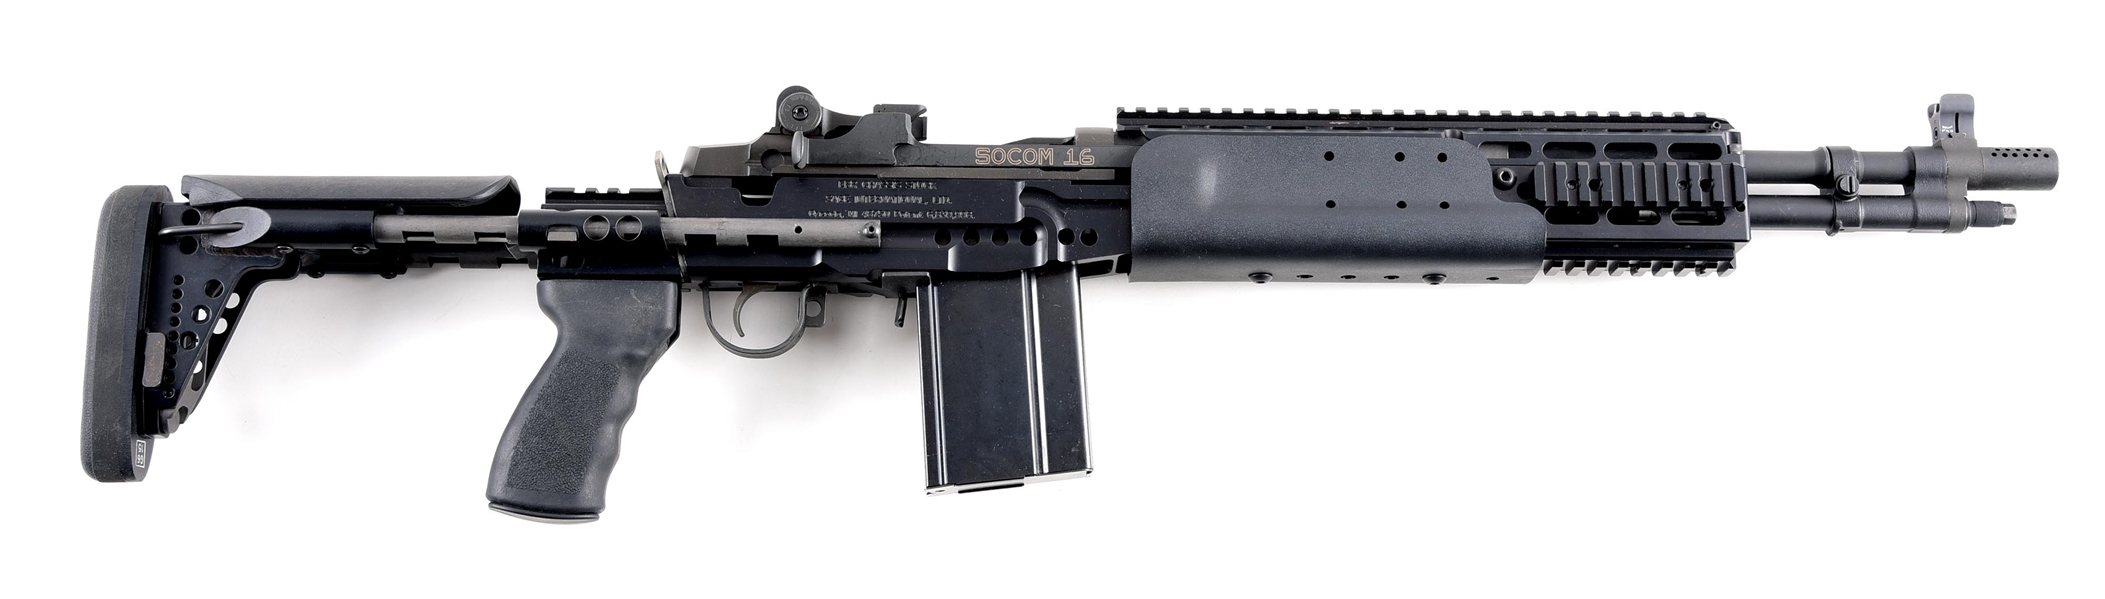 (M) SPRINGFIELD SOCOM 16 M1A SEMI AUTOMATIC RIFLE IN DESIRABLE EBR CHASSIS.